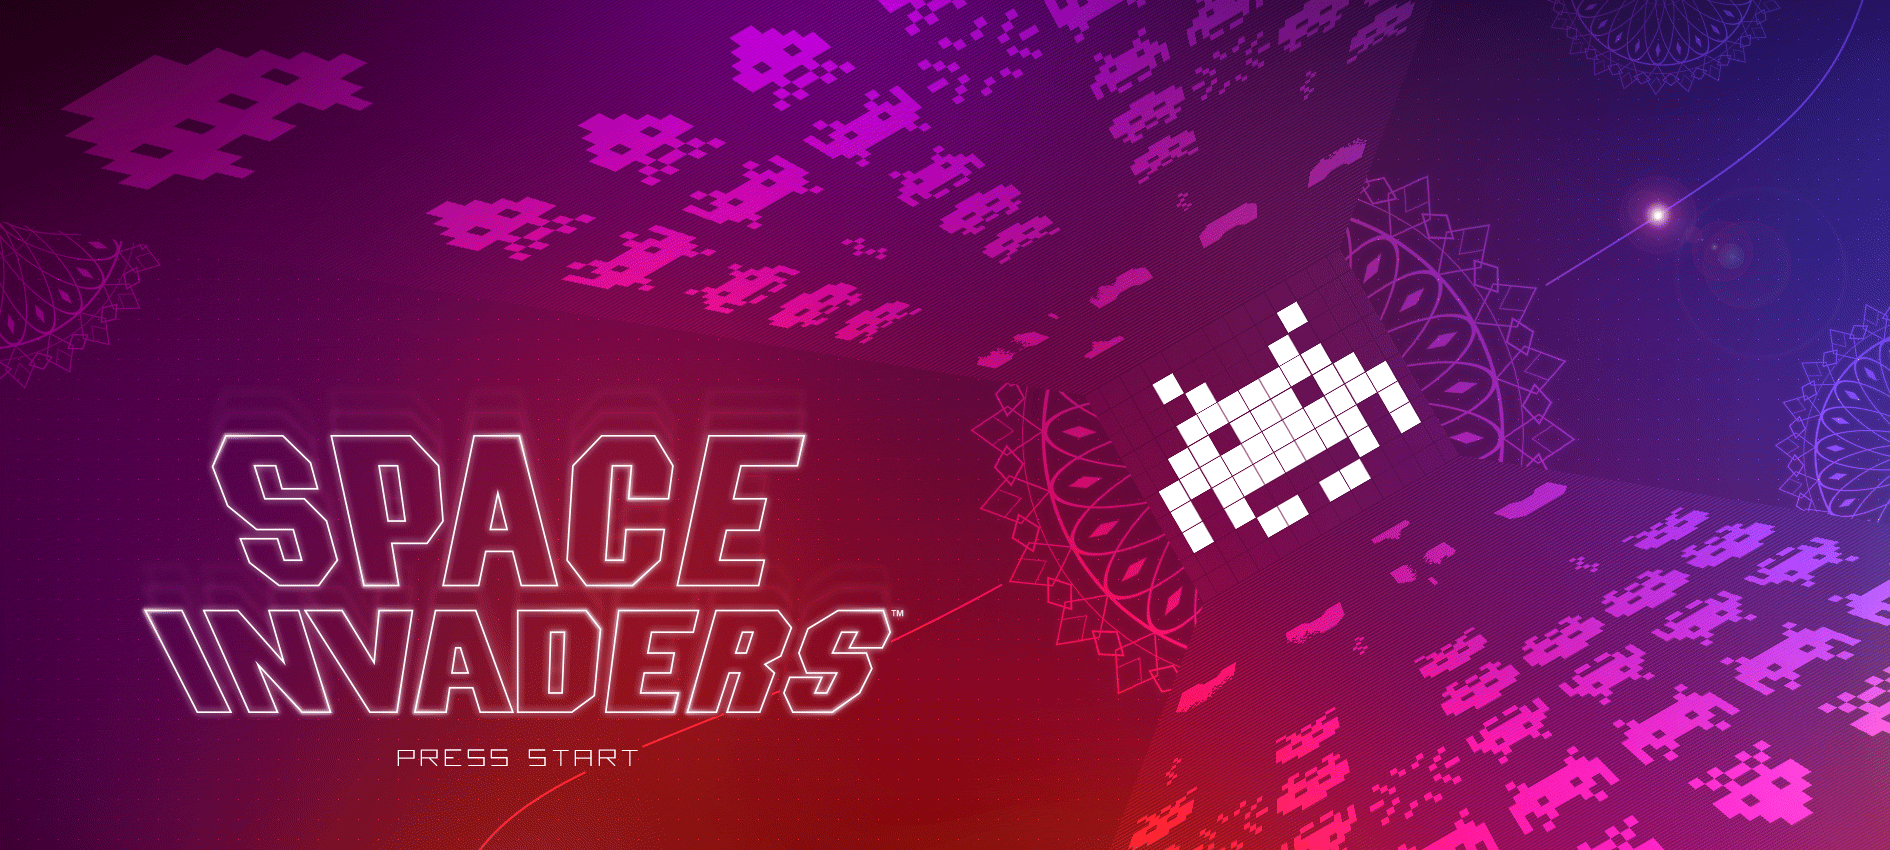 Space Invaders with the UFO character